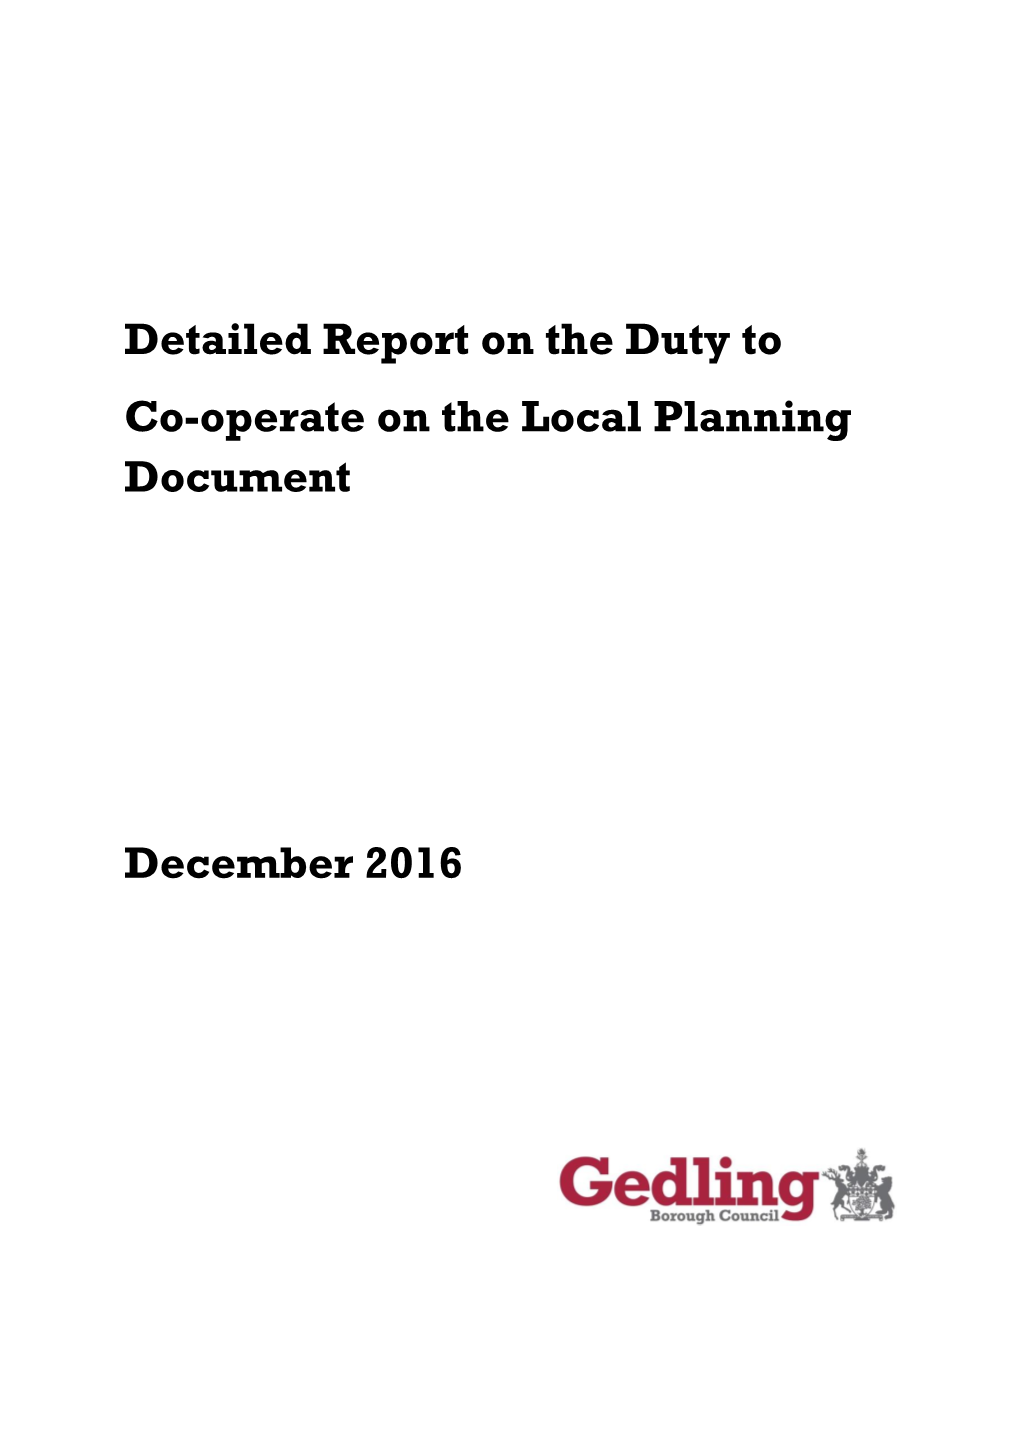 Detailed Report on the Duty to Co-Operate on the Local Planning Document December 2016